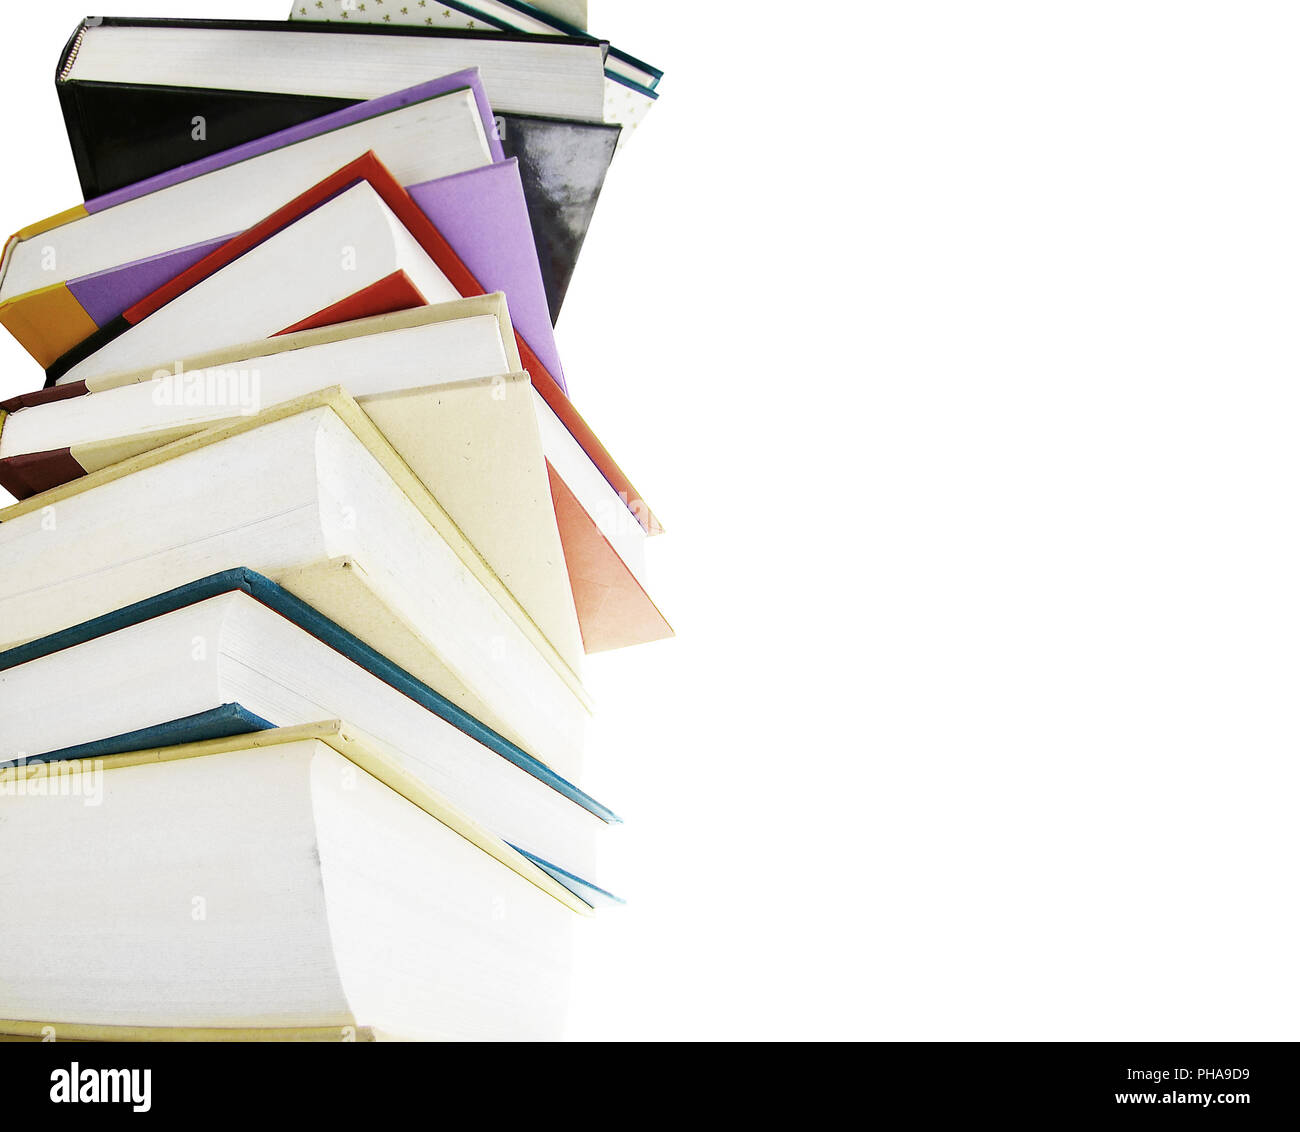 Stack of hardcover books isolated on white Stock Photo